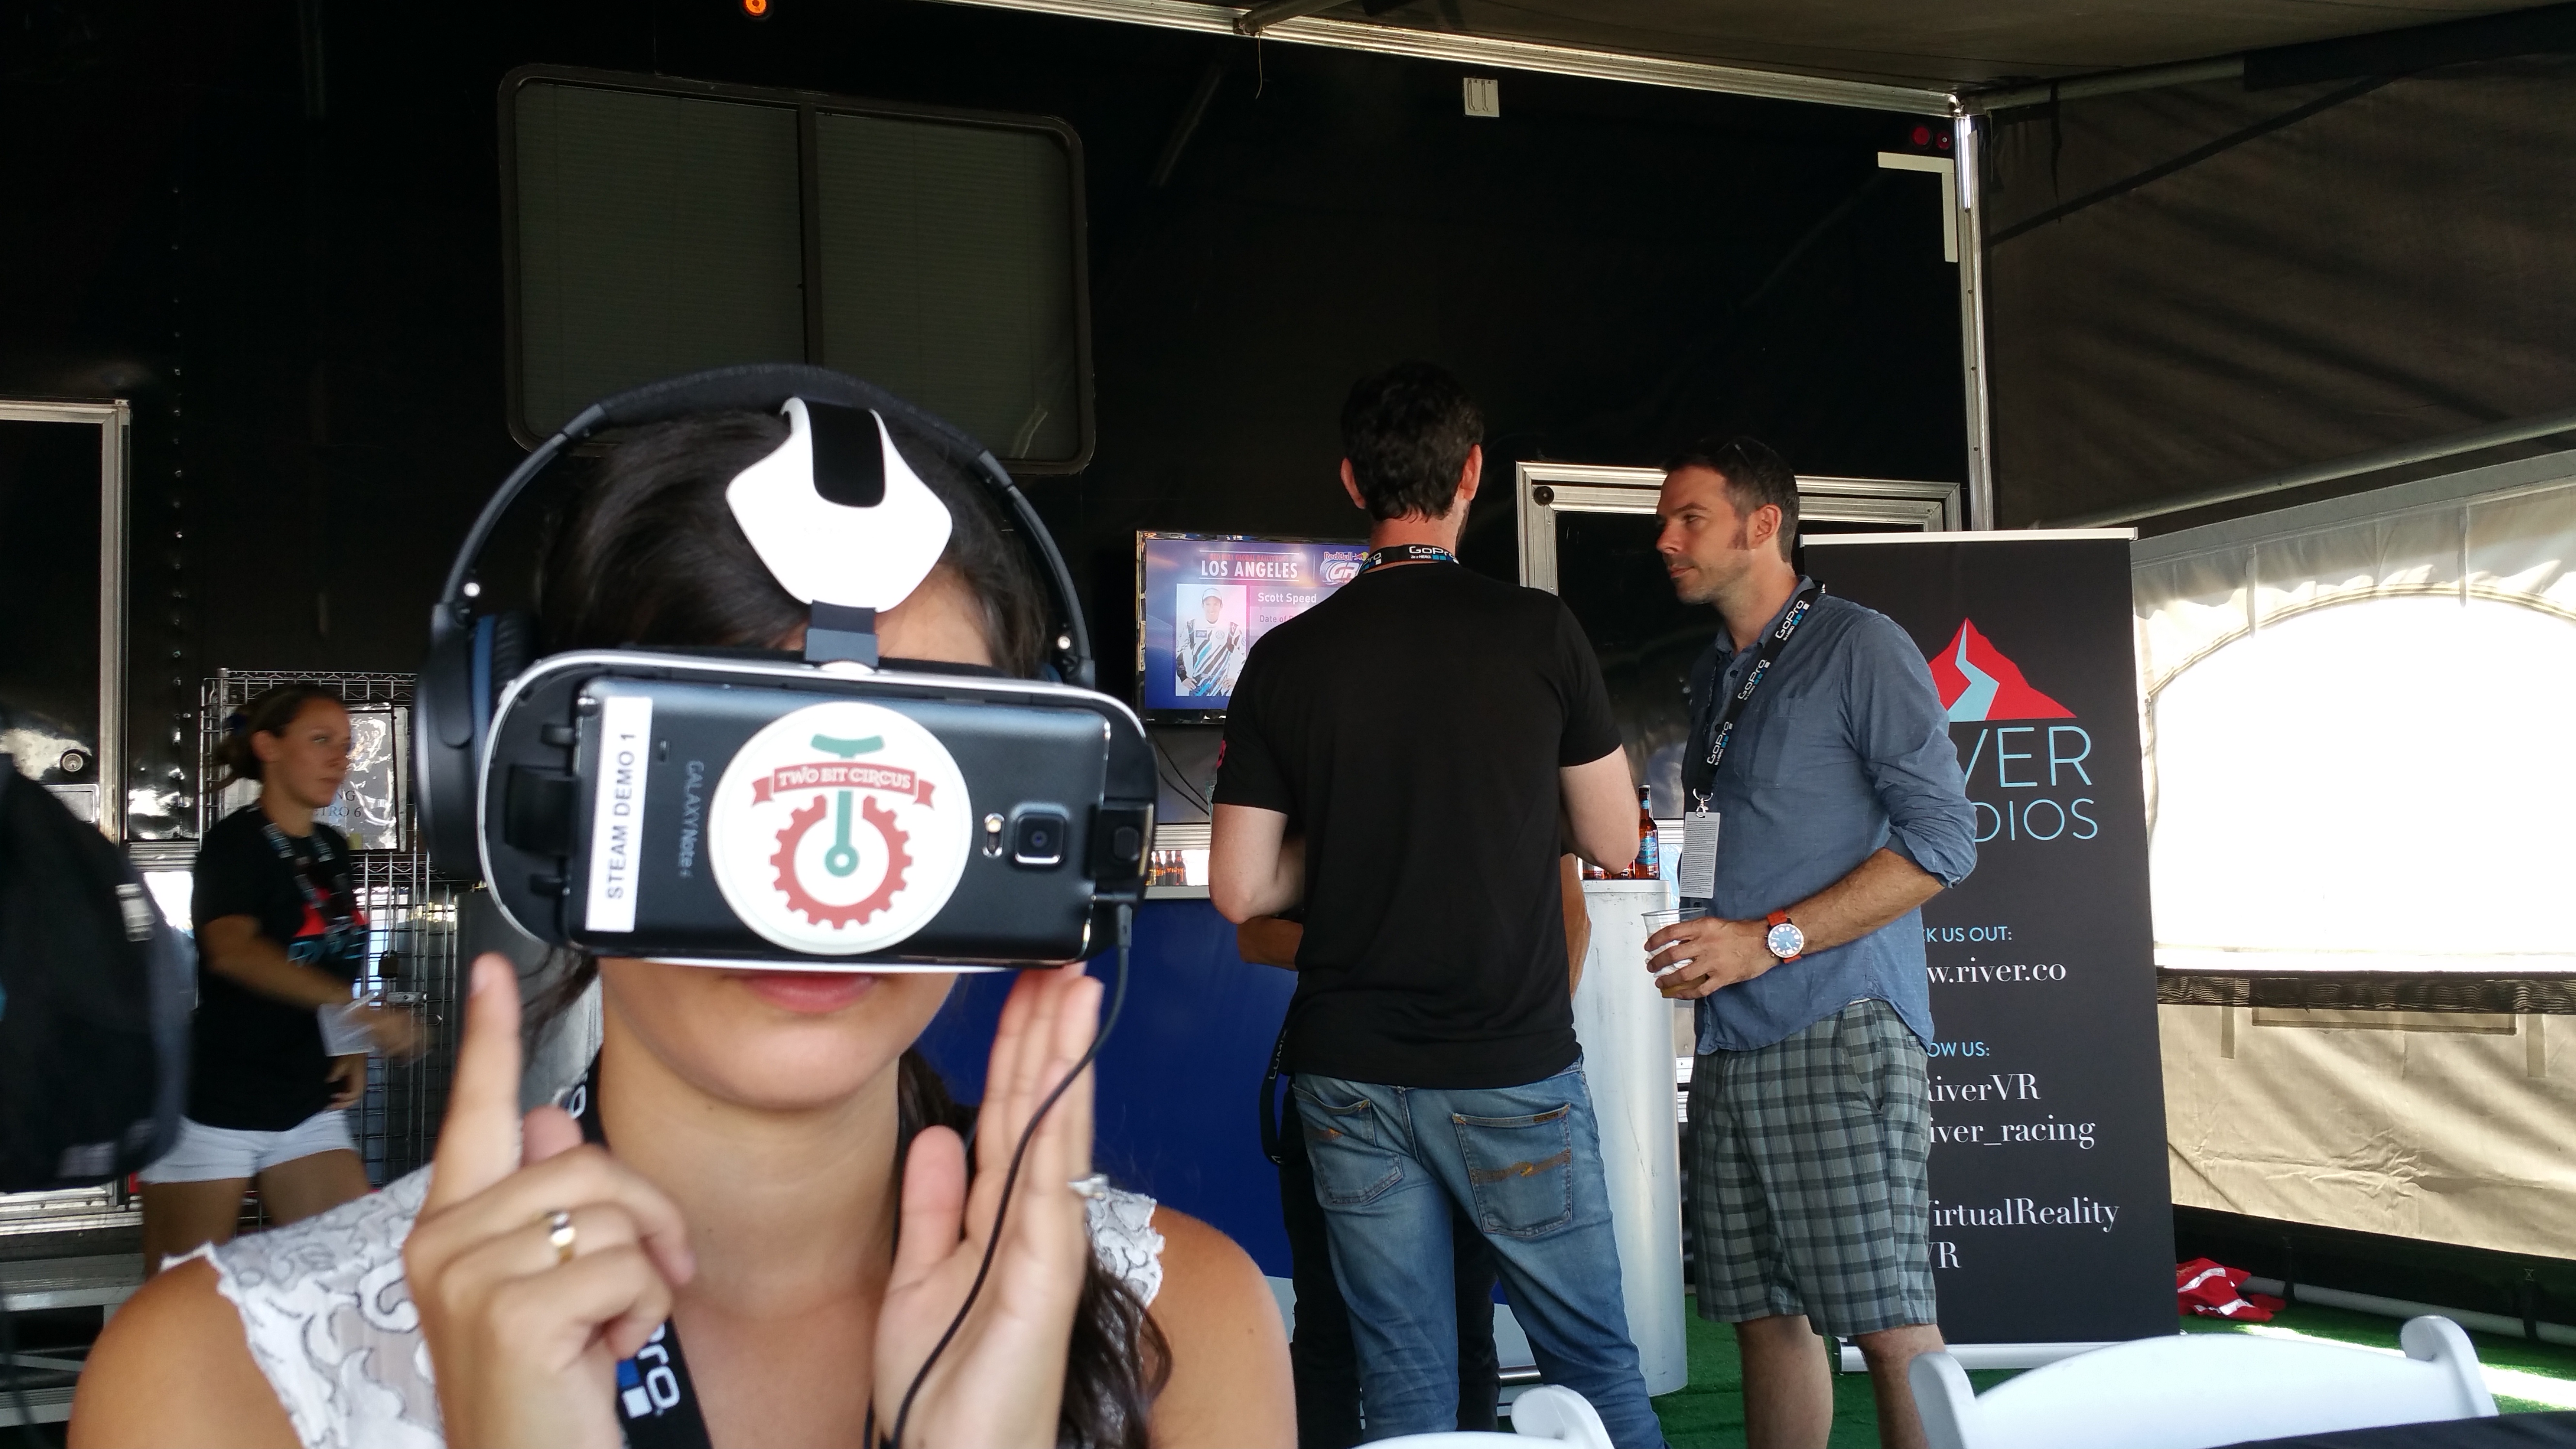 A couple of VR demos floated around the VIP area during the race. 